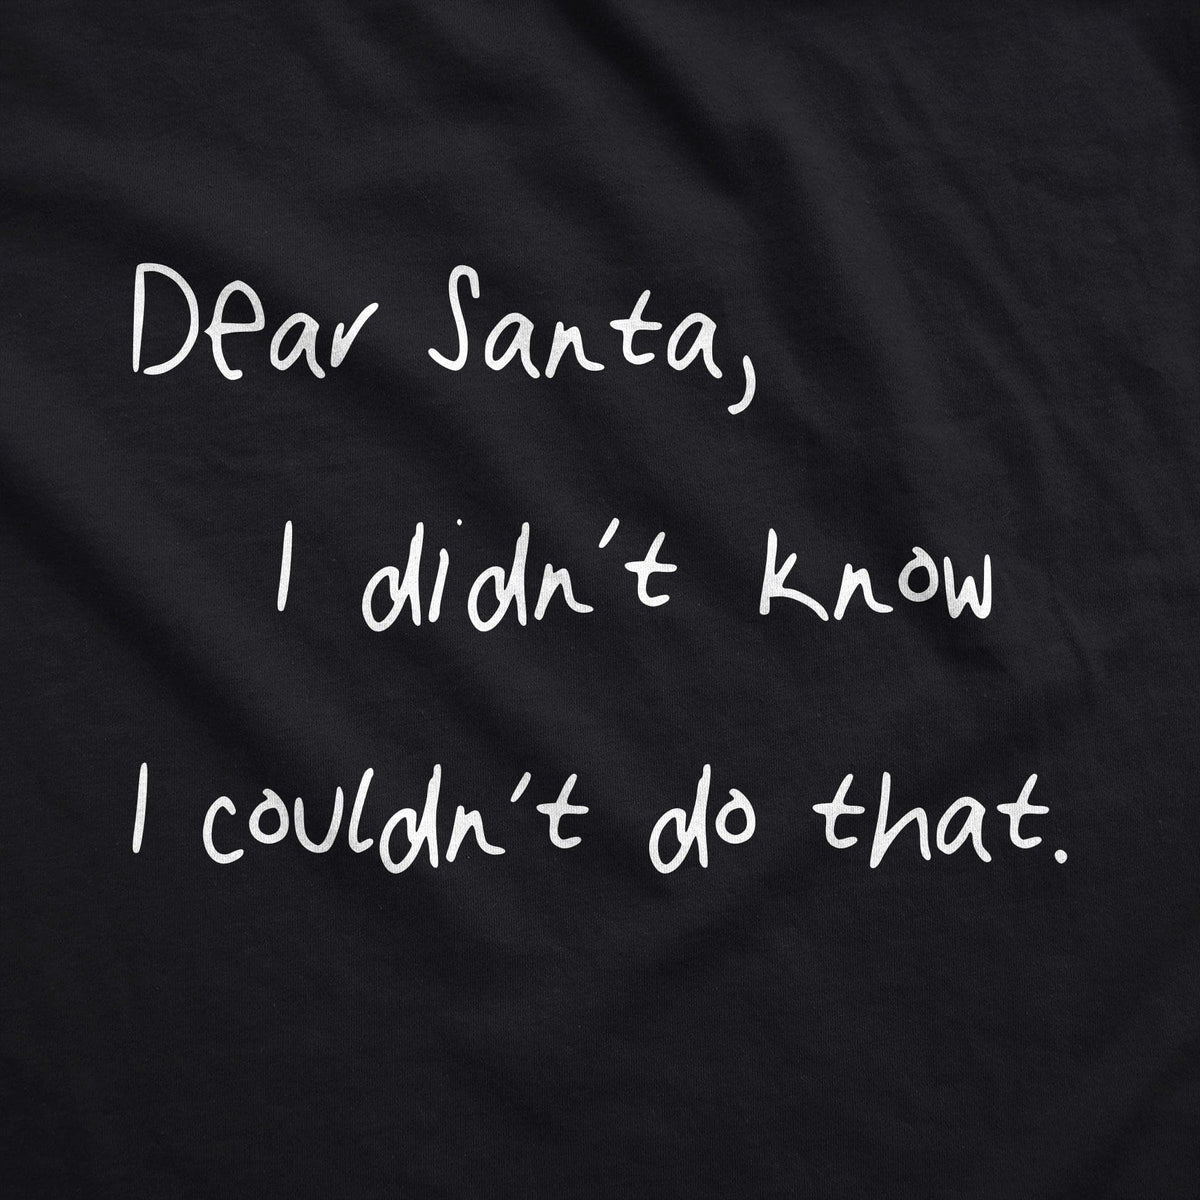 Dear Santa I Didn&#39;t Know I Couldn&#39;t Do That Face Mask Mask - Crazy Dog T-Shirts